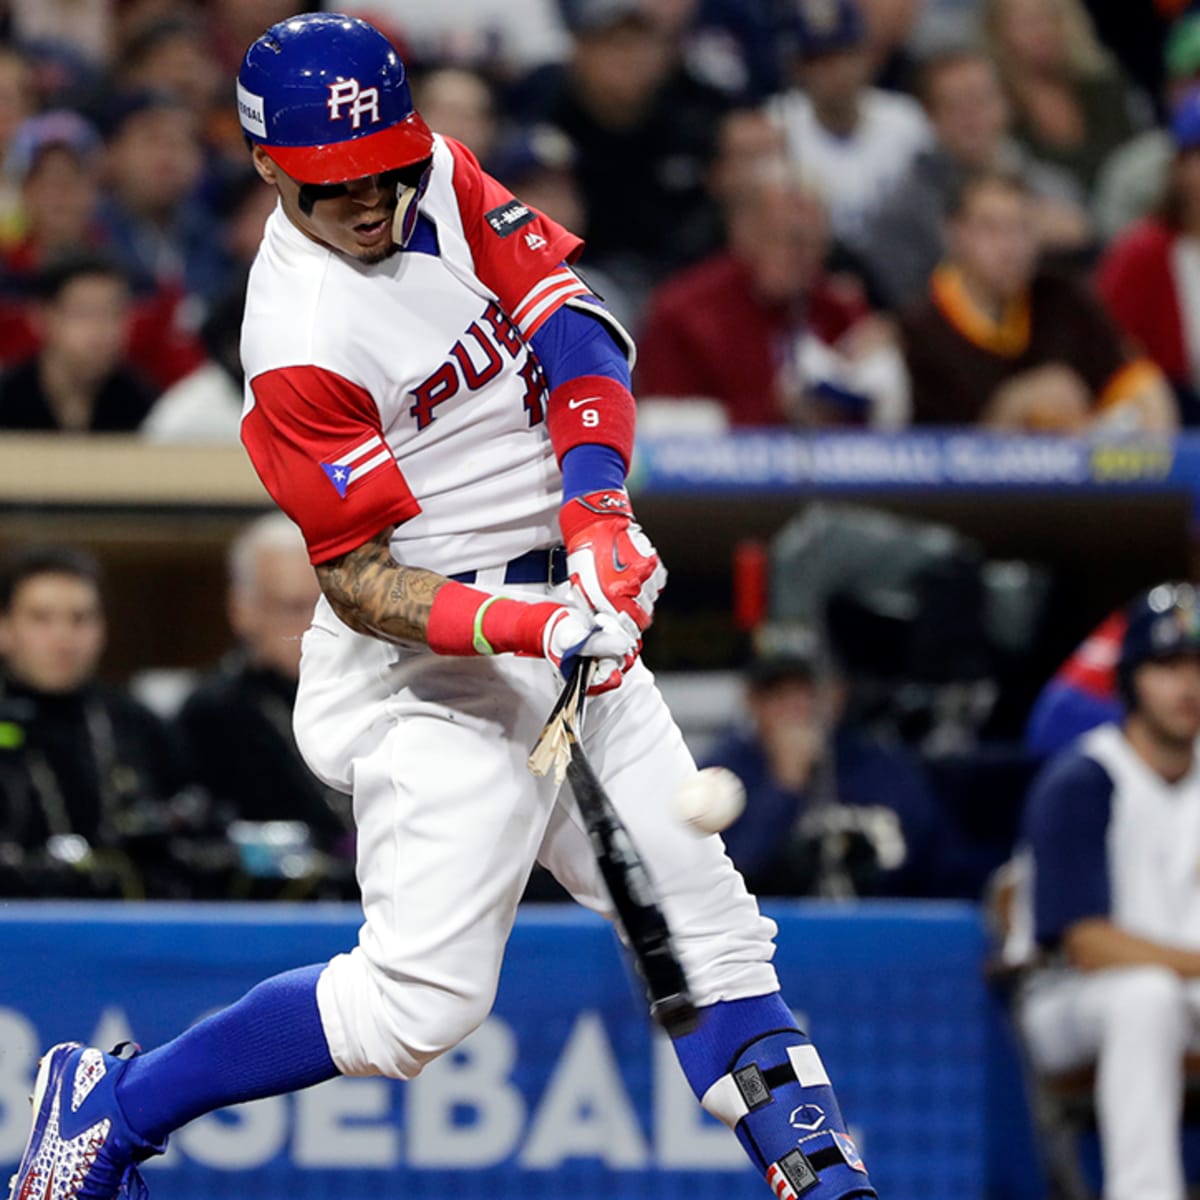 United States blanks Puerto Rico to win WBC title